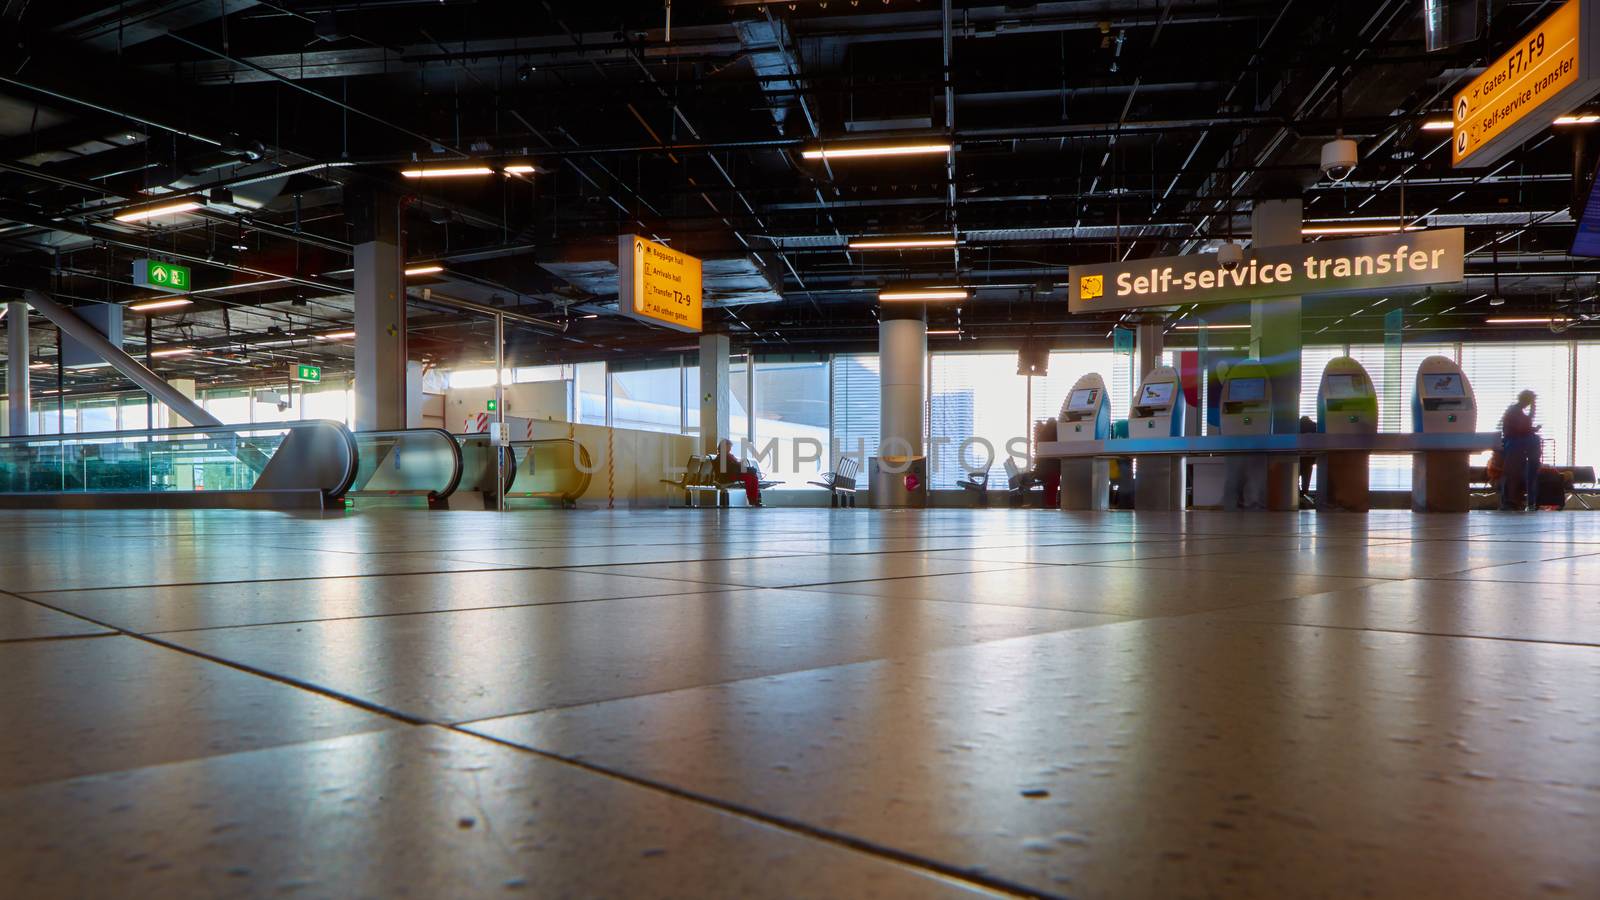 Amsterdam, Netherlands - March 11, 2016: self check-in kiosk in Amsterdam Airport Schiphol. Amsterdam Airport Schiphol is the main international airport of the Netherlands.